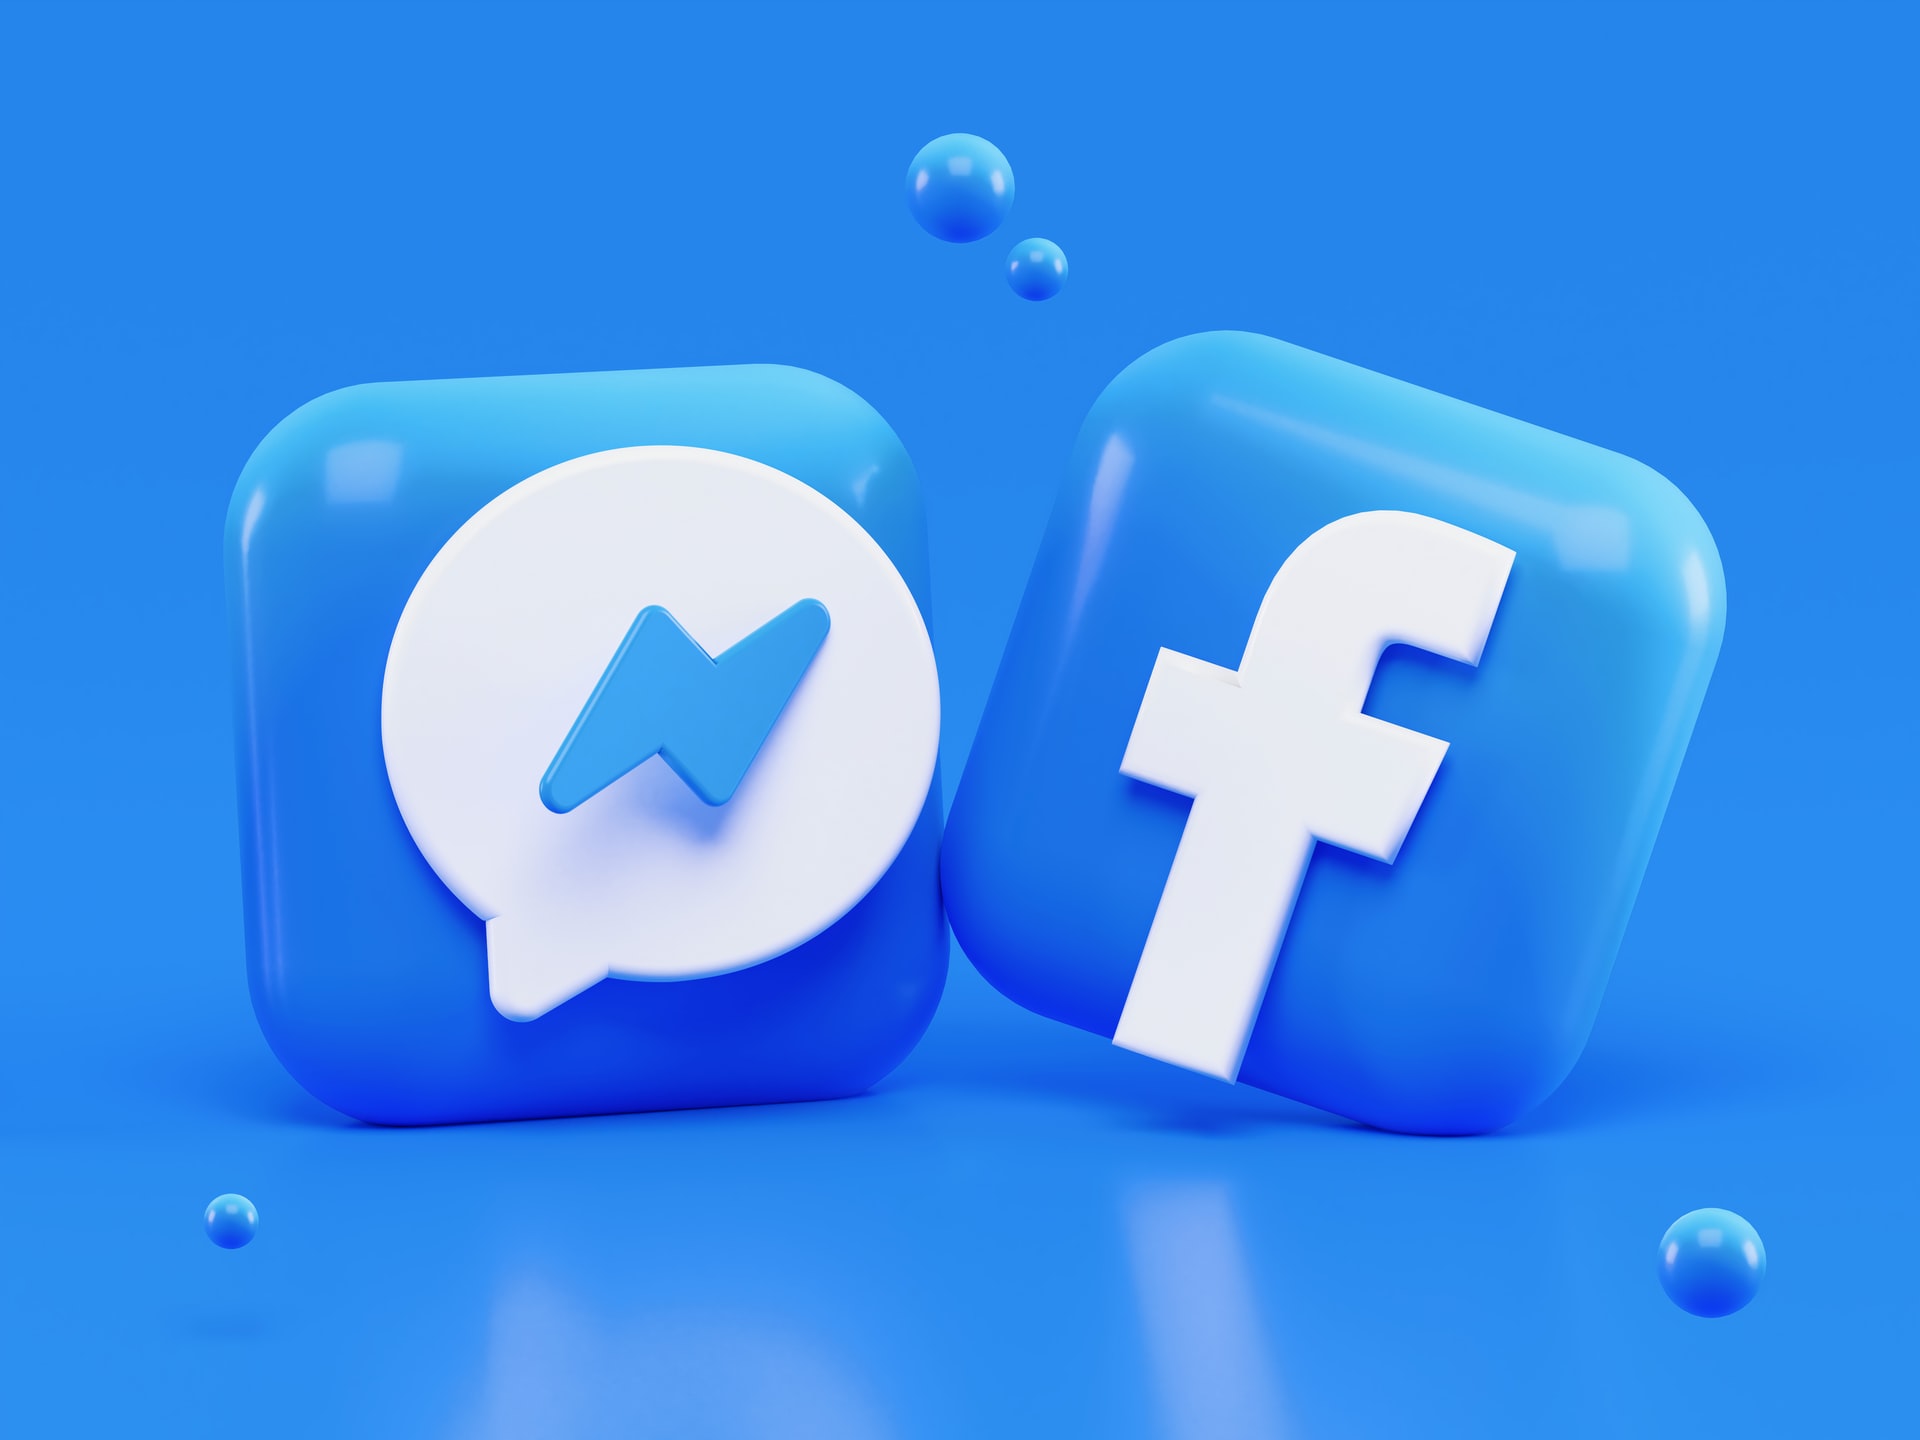 Looking to leverage the power of social media to grow your business? Then you need to know these 93 Facebook statistics to stay a step ahead of the game.